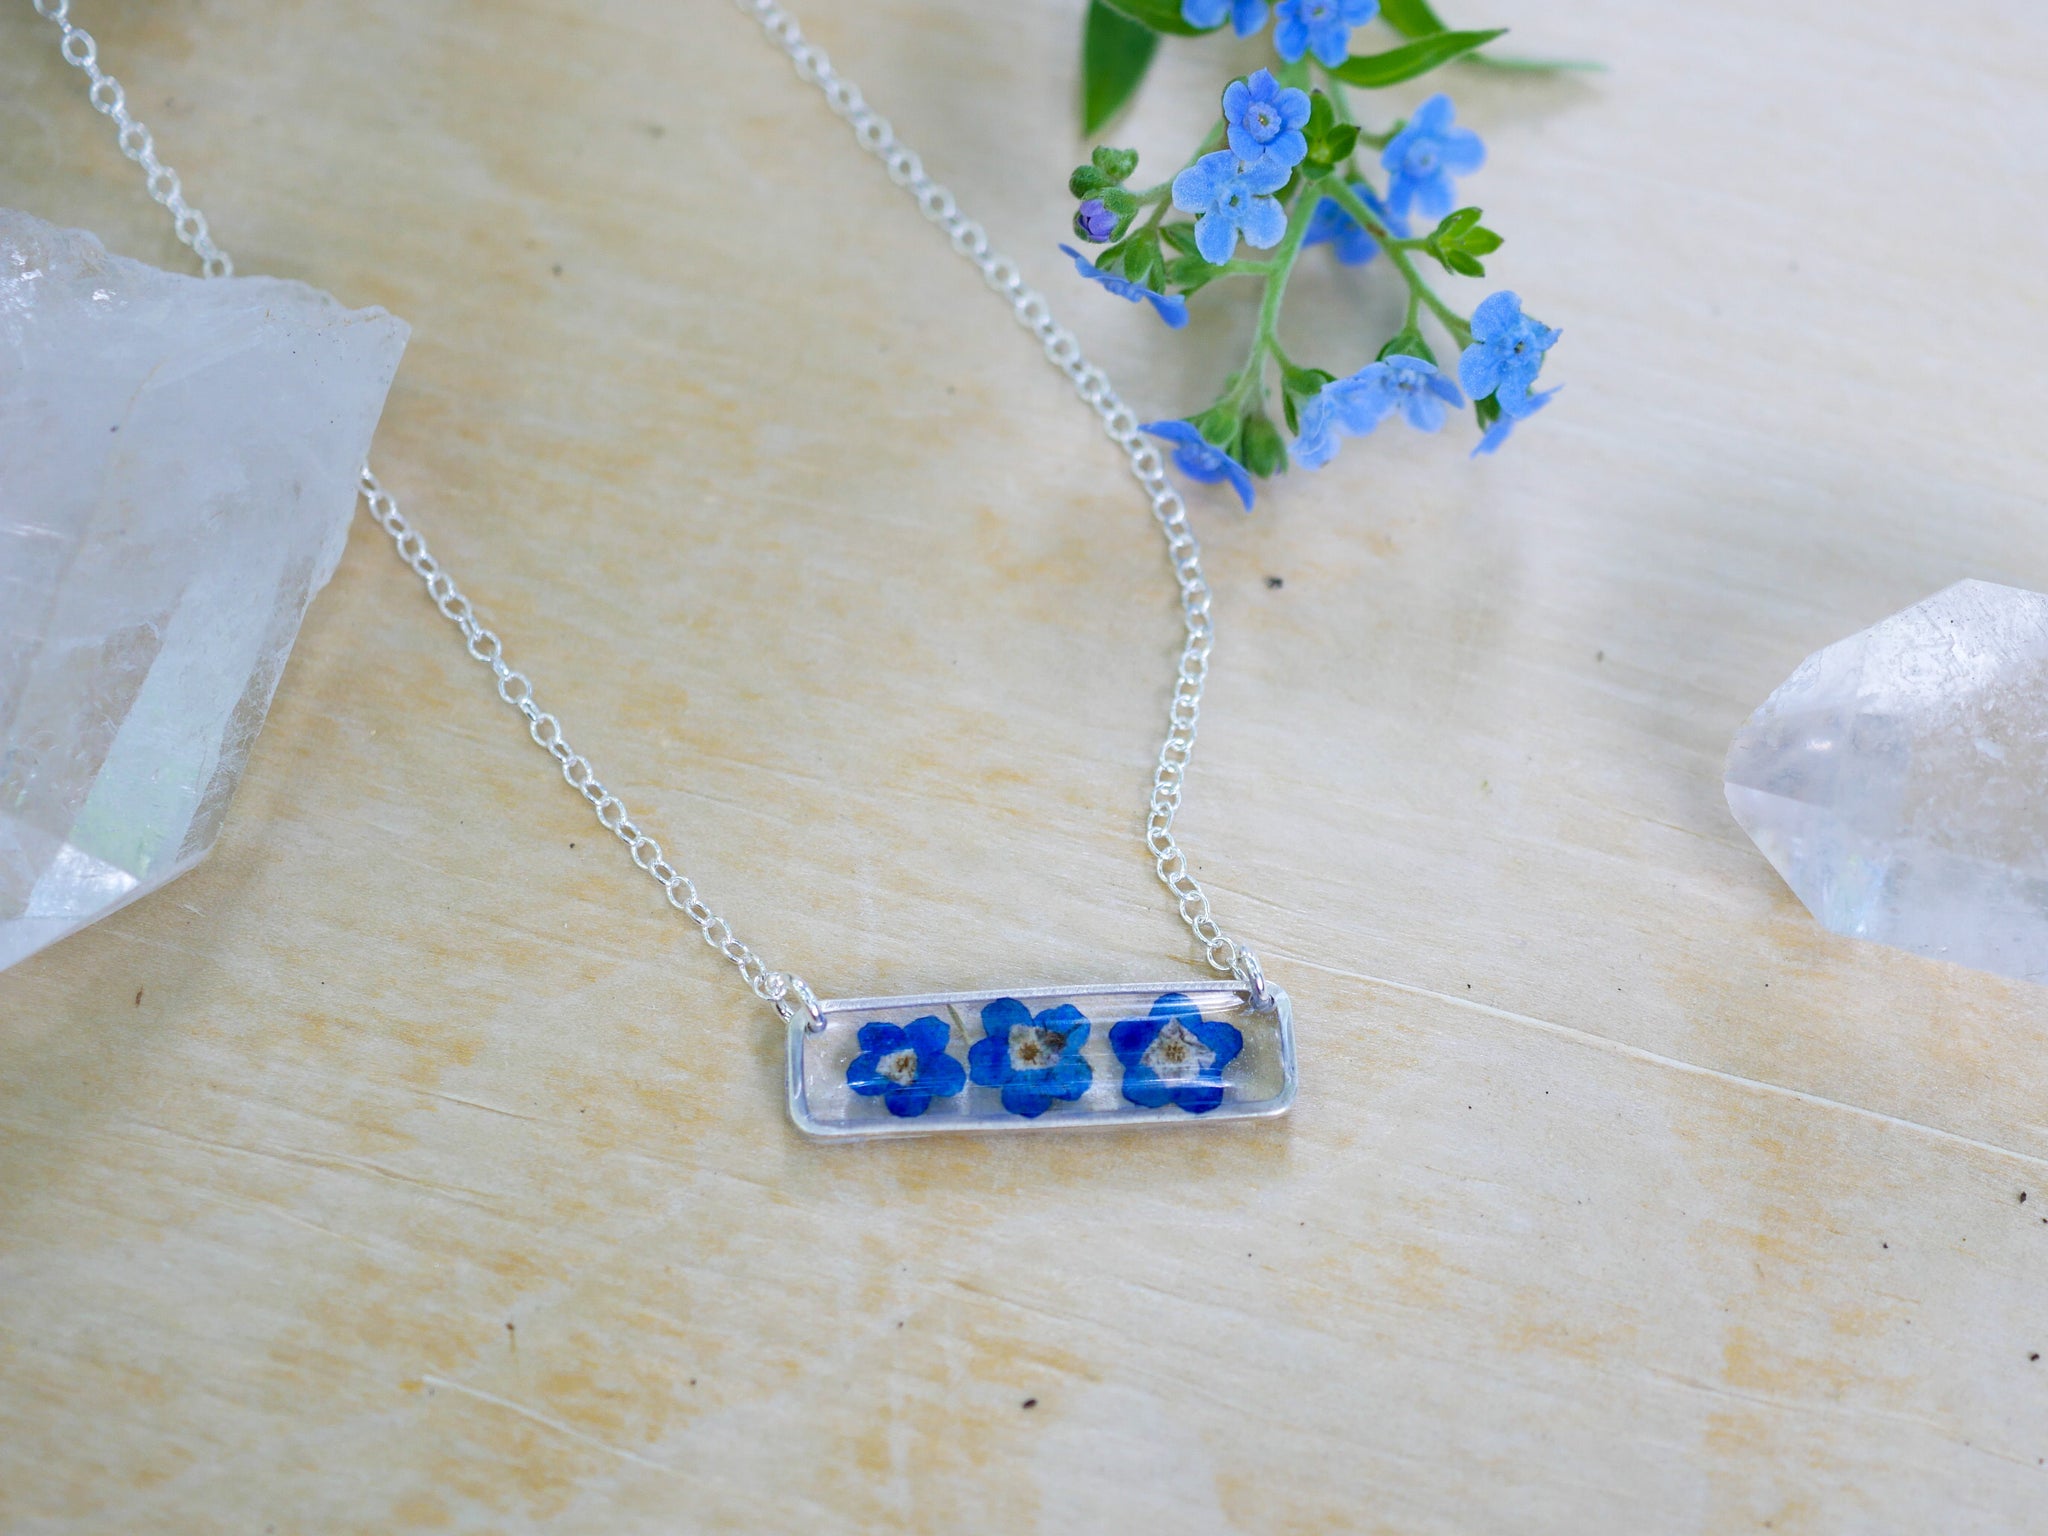 Forget me not horizontal bar necklace